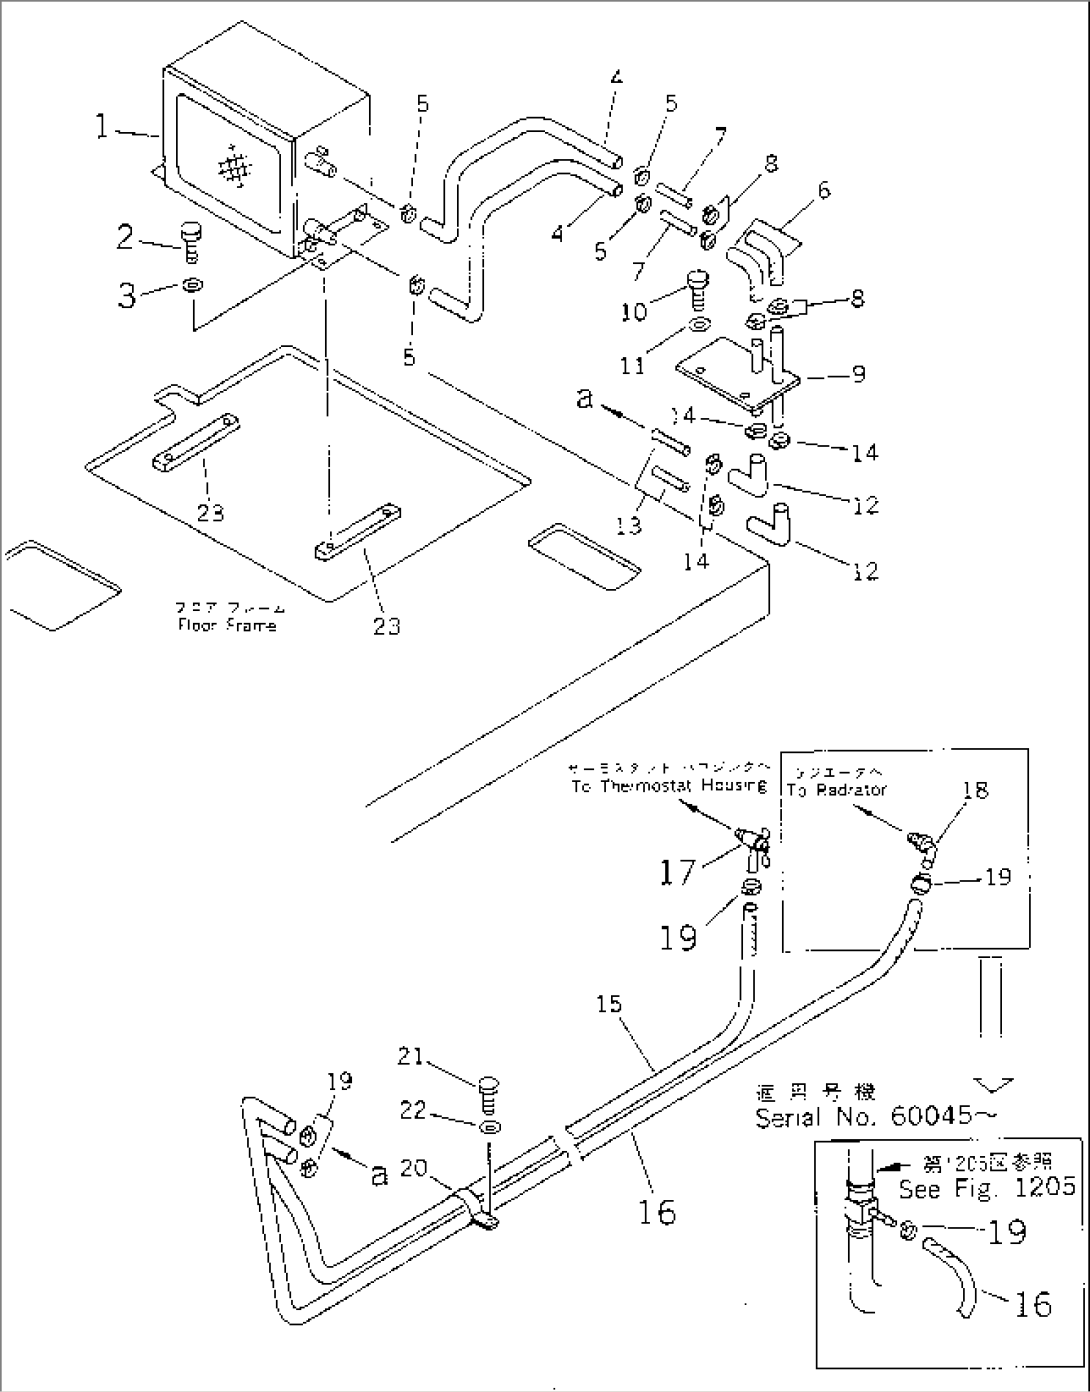 CAR HEATER (1/4) (HEATER UNIT AND PIPING)